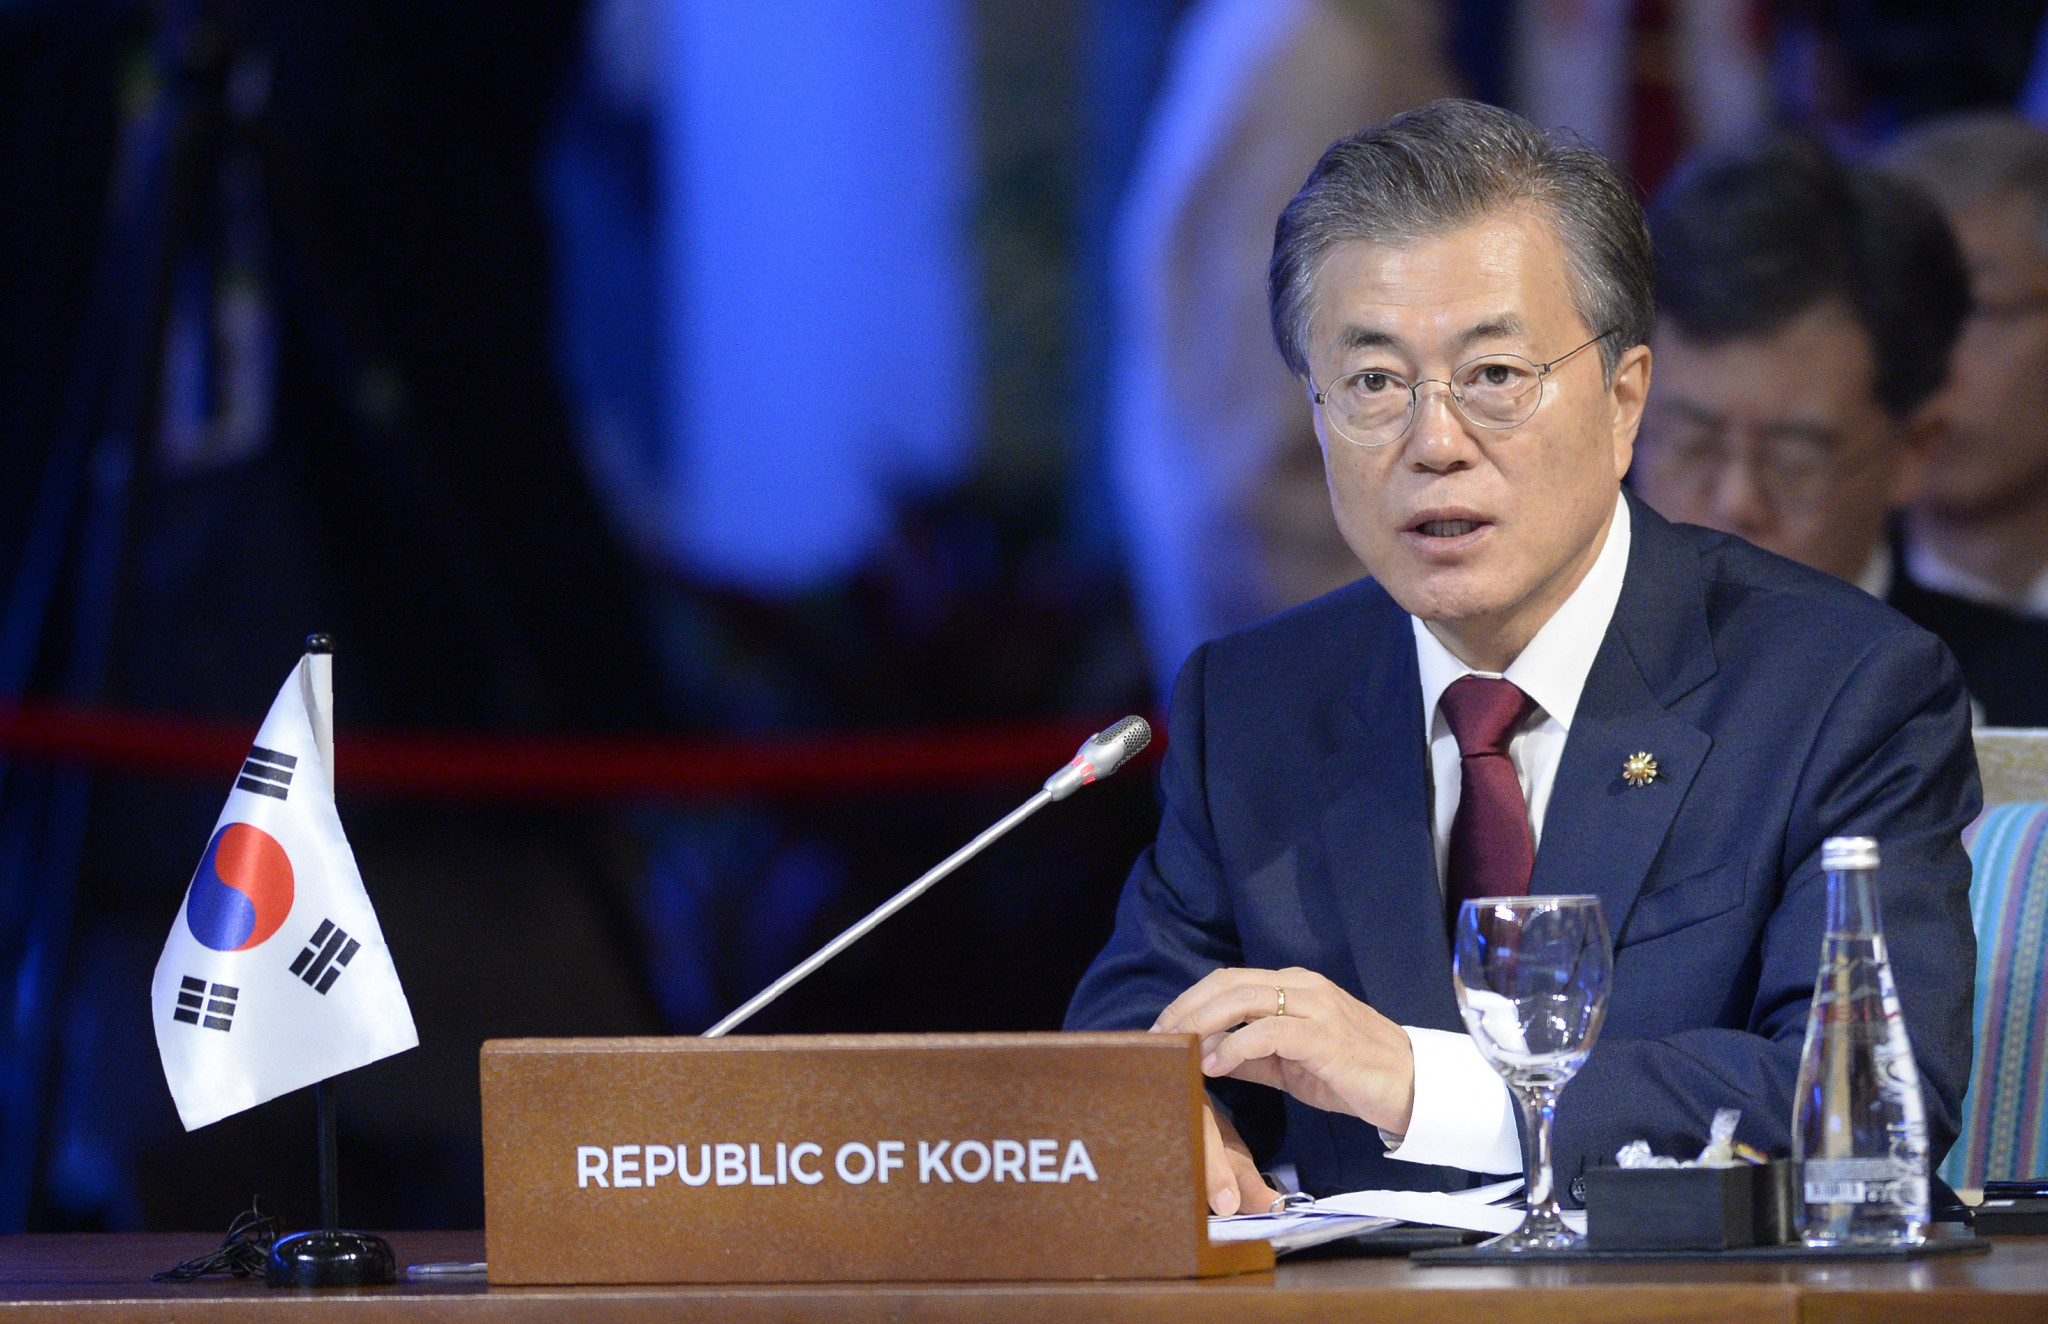 Moon Jae-in assumed office as President of South Korea in May ©Getty Images